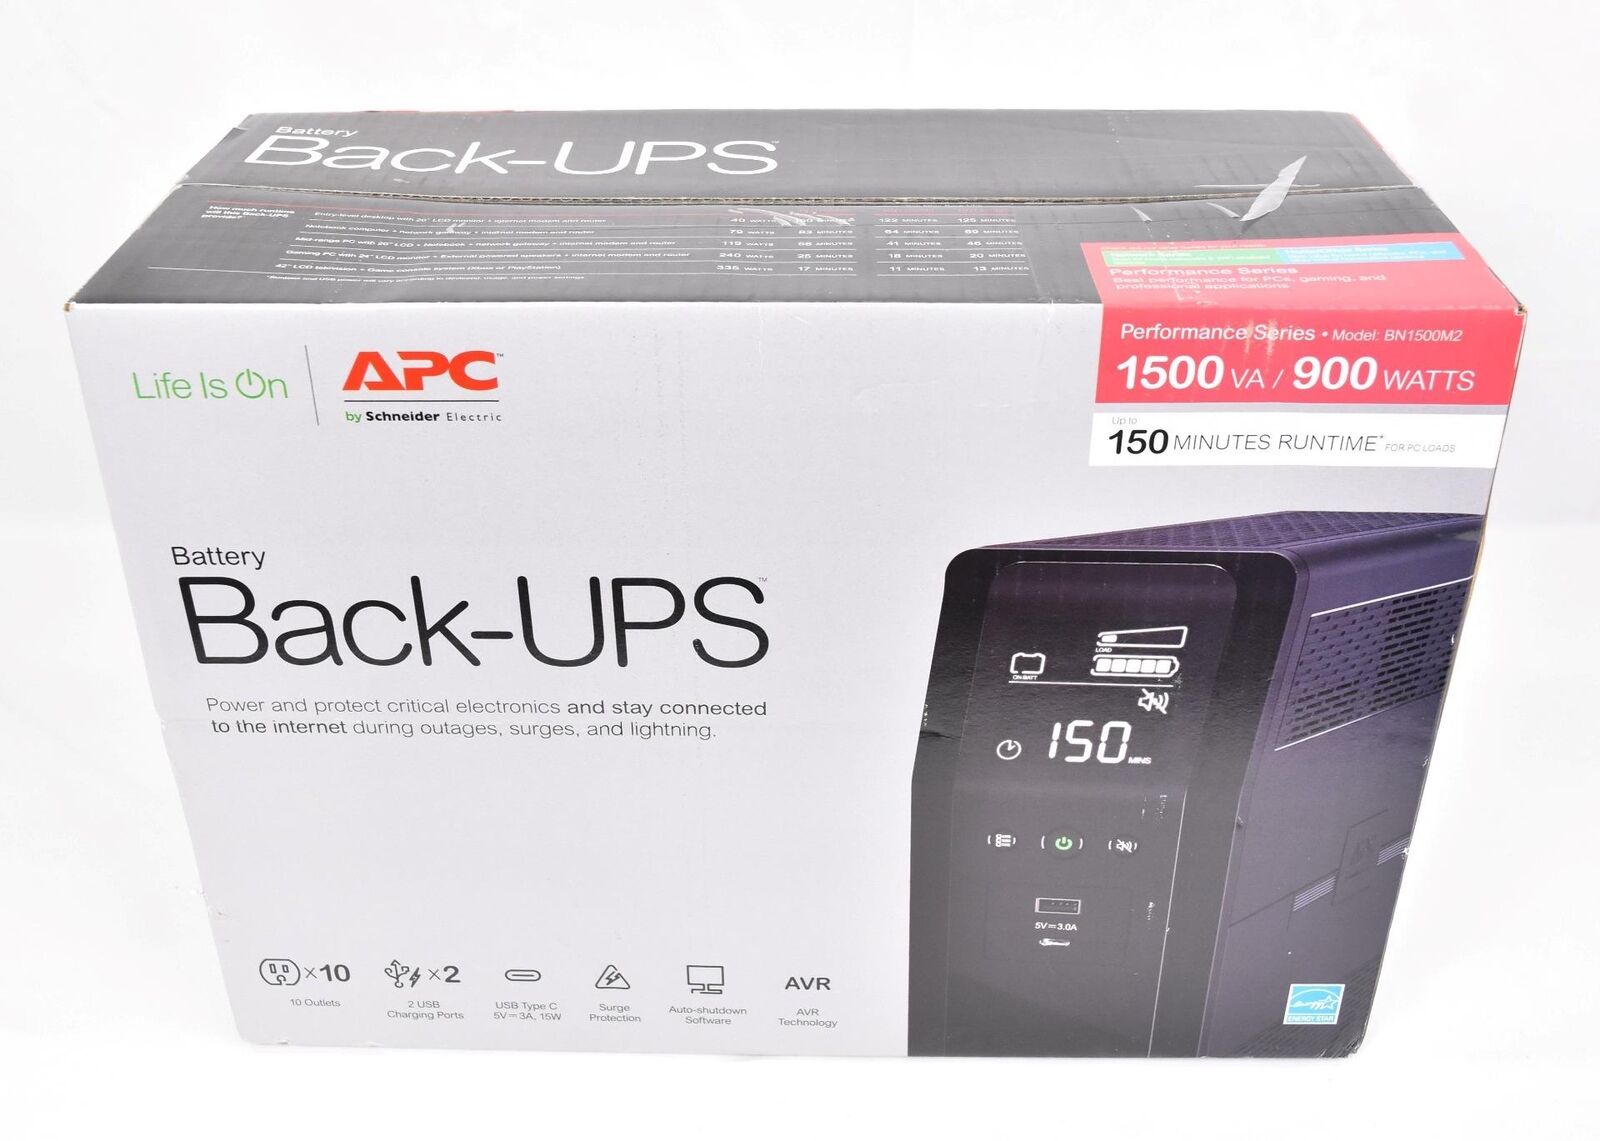 APC BN1500M2 10 Outlet Battery Back UPS 1500VA 900 Watts 150 Minutes Runtime